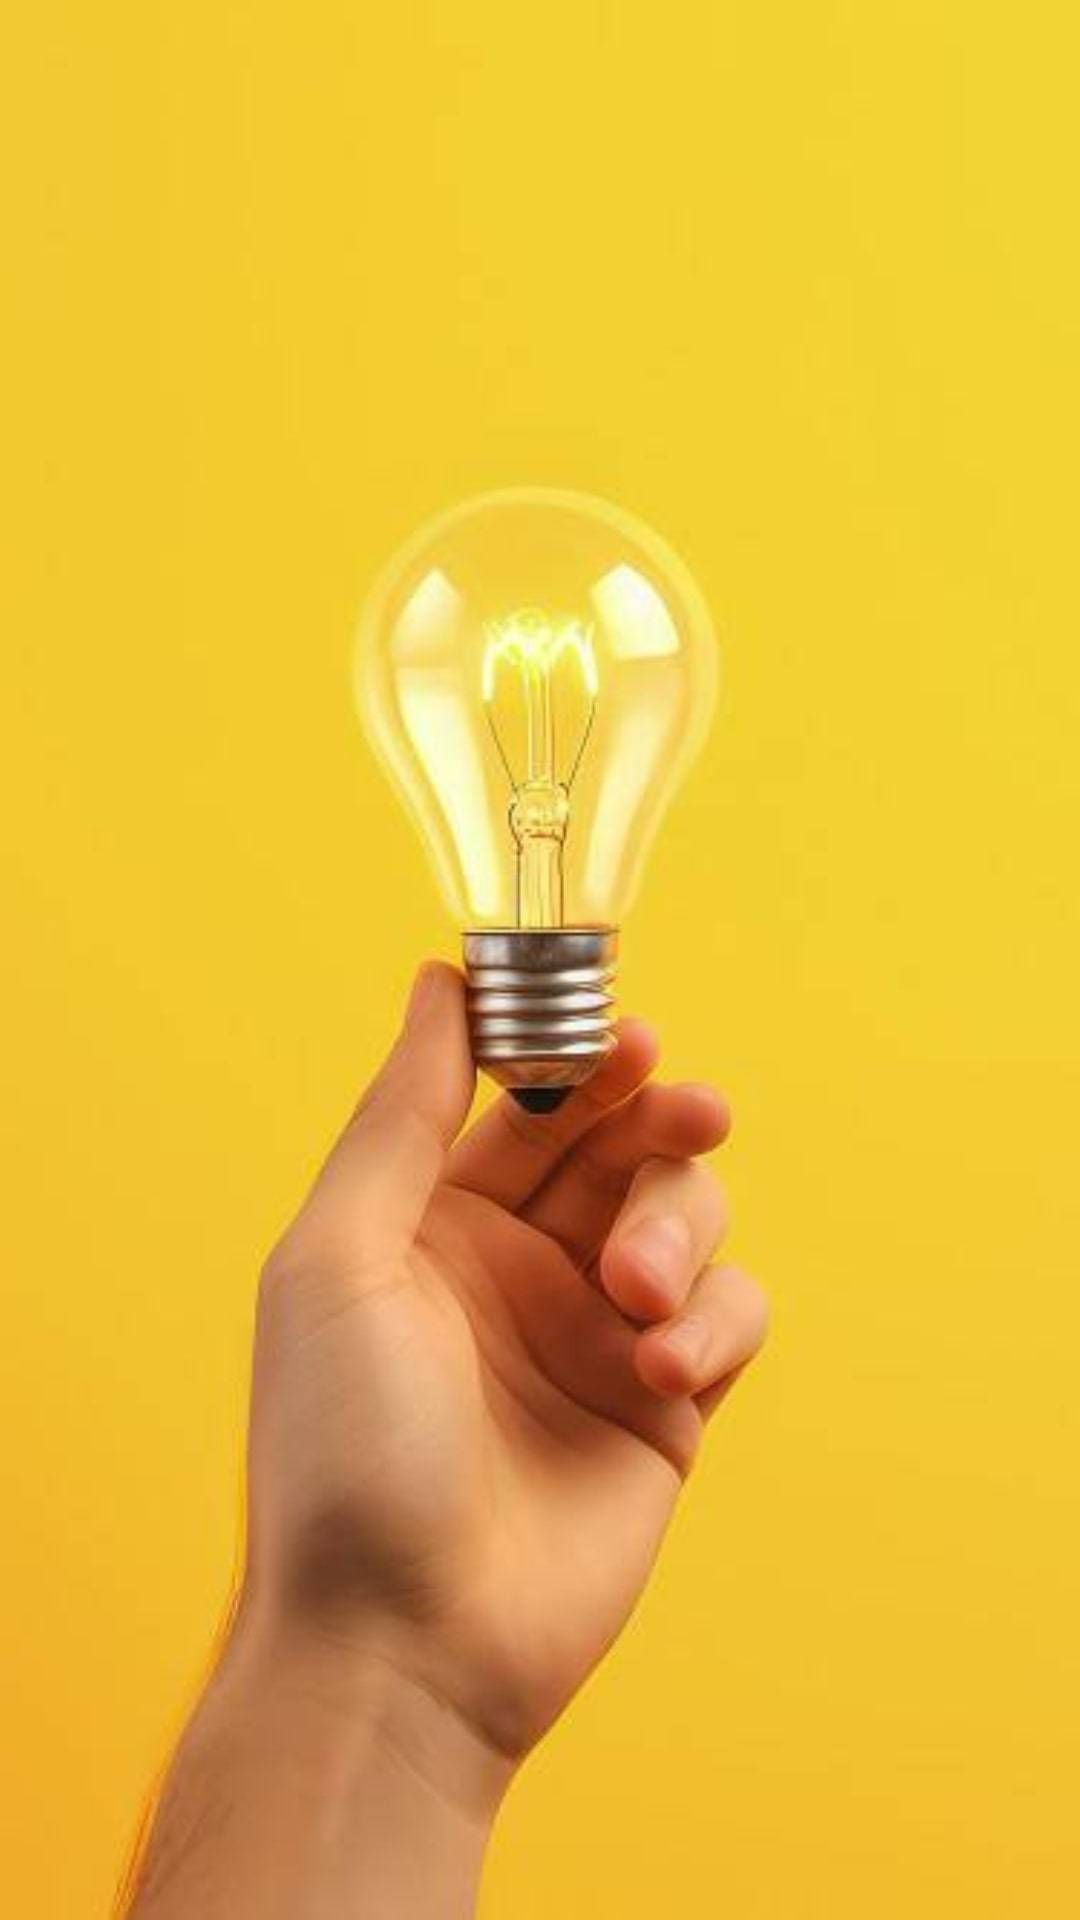 A hand holding a light bulb over a yellow background, illustrating the concept of an idea or innovation.